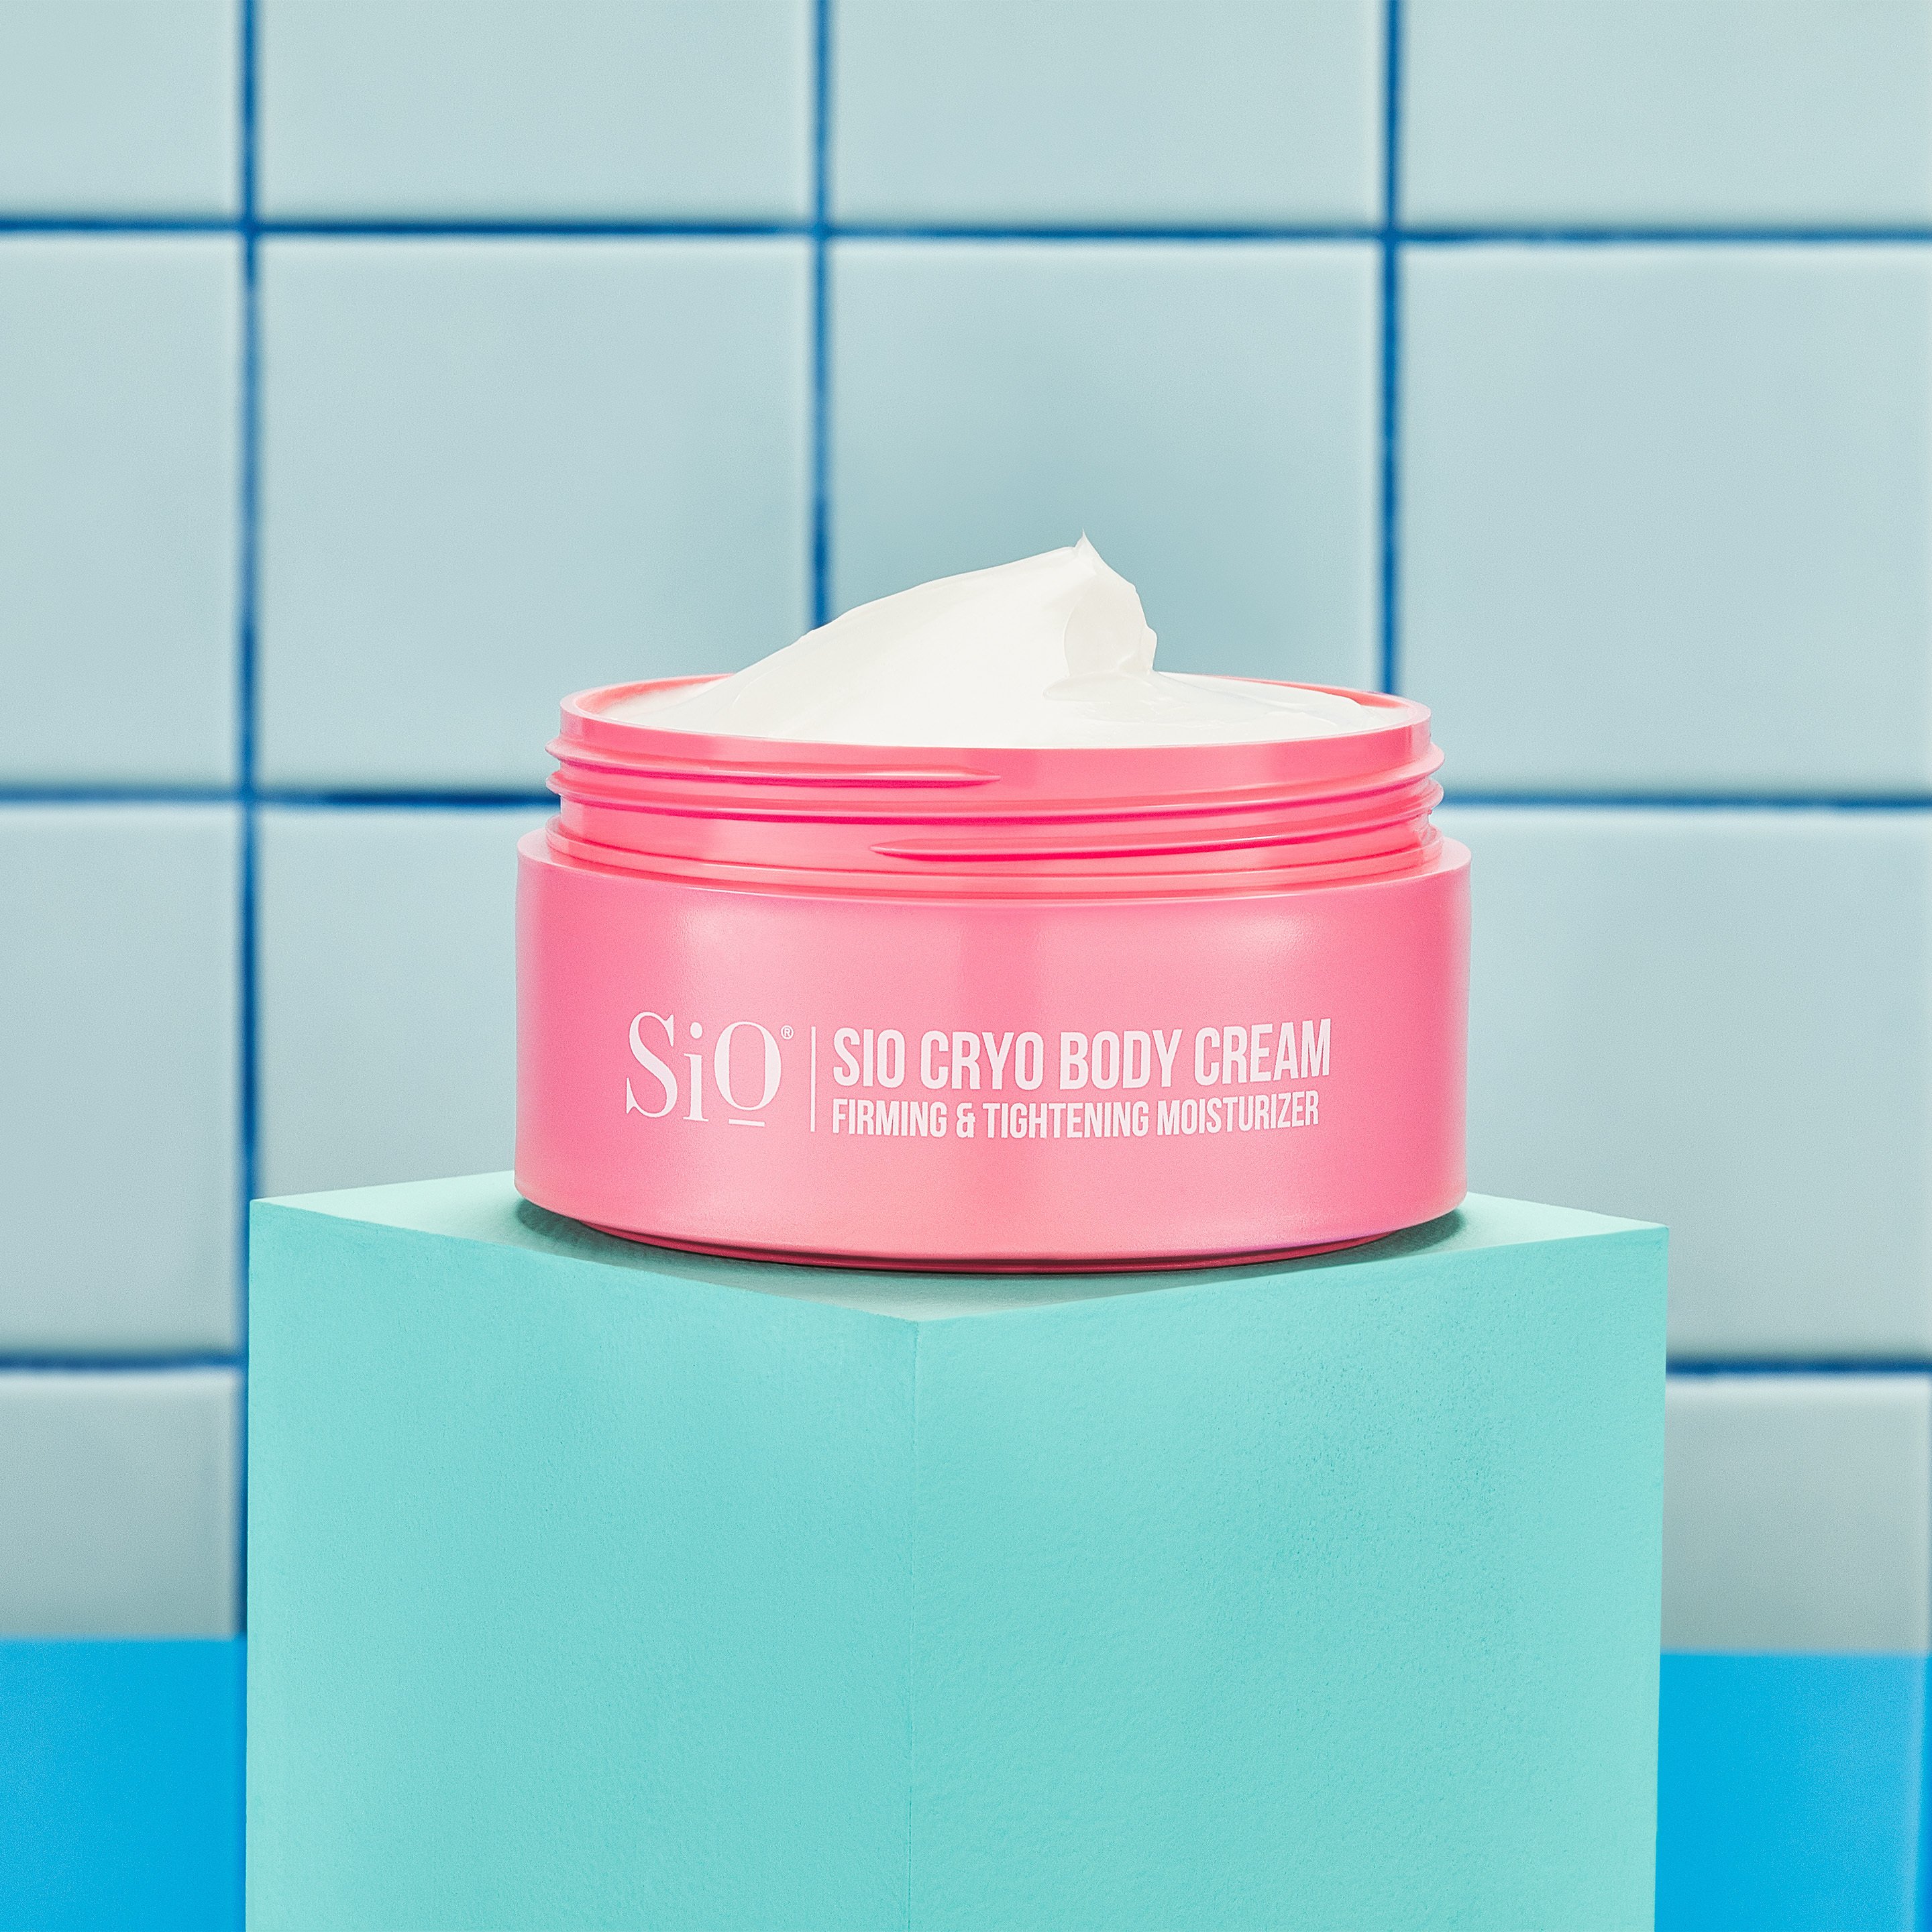 sio beauty product image